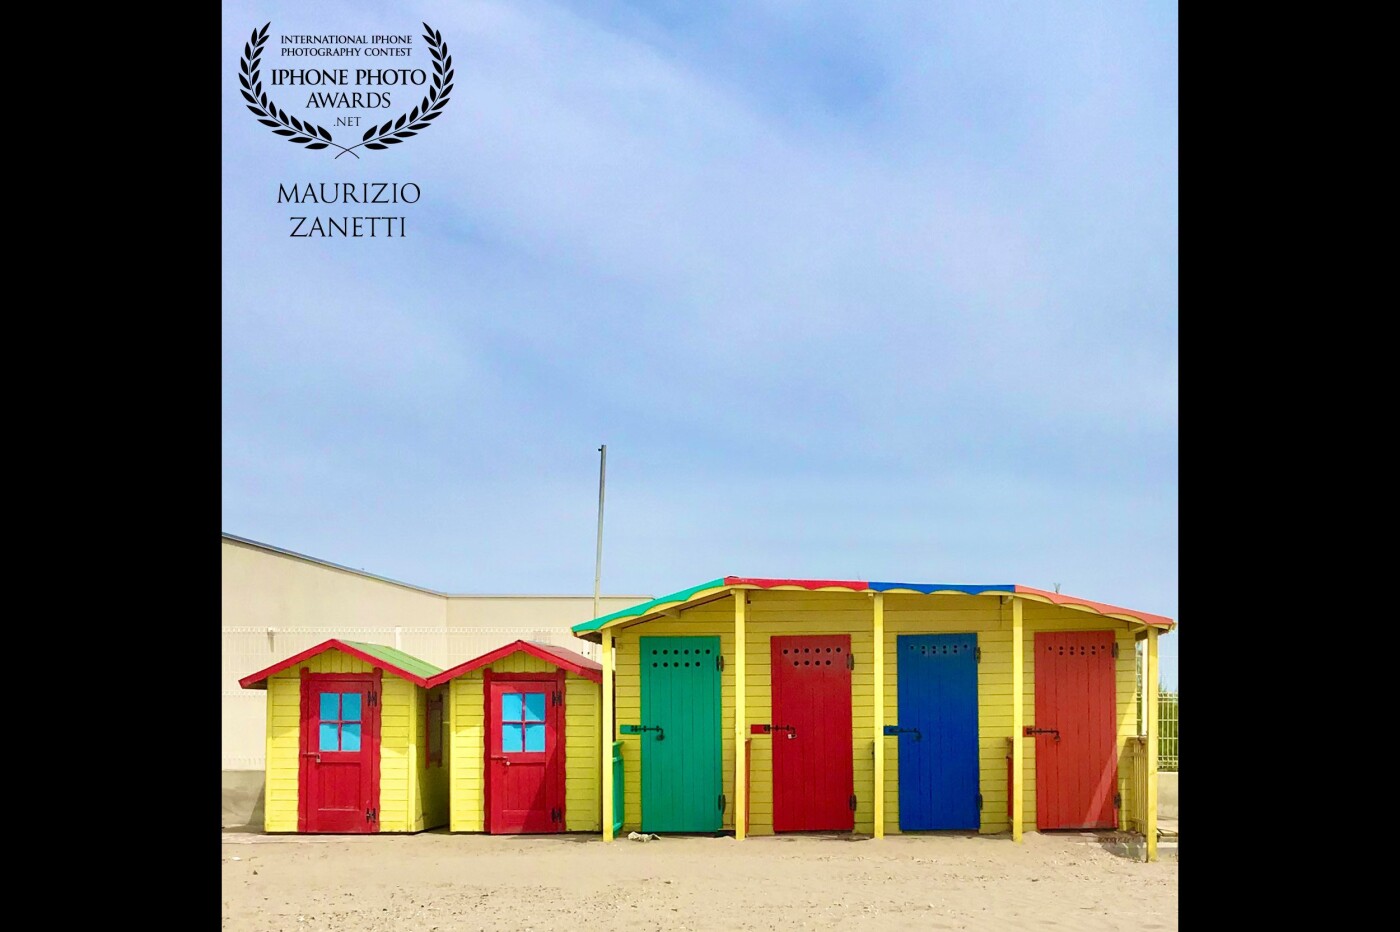 Waiting for the first tourists, the newly painted beach cabins give a touch of color. And a taste of the old holidays. Photo was taken in Sottomarina (Chioggia) with iPhone7, no post-production.